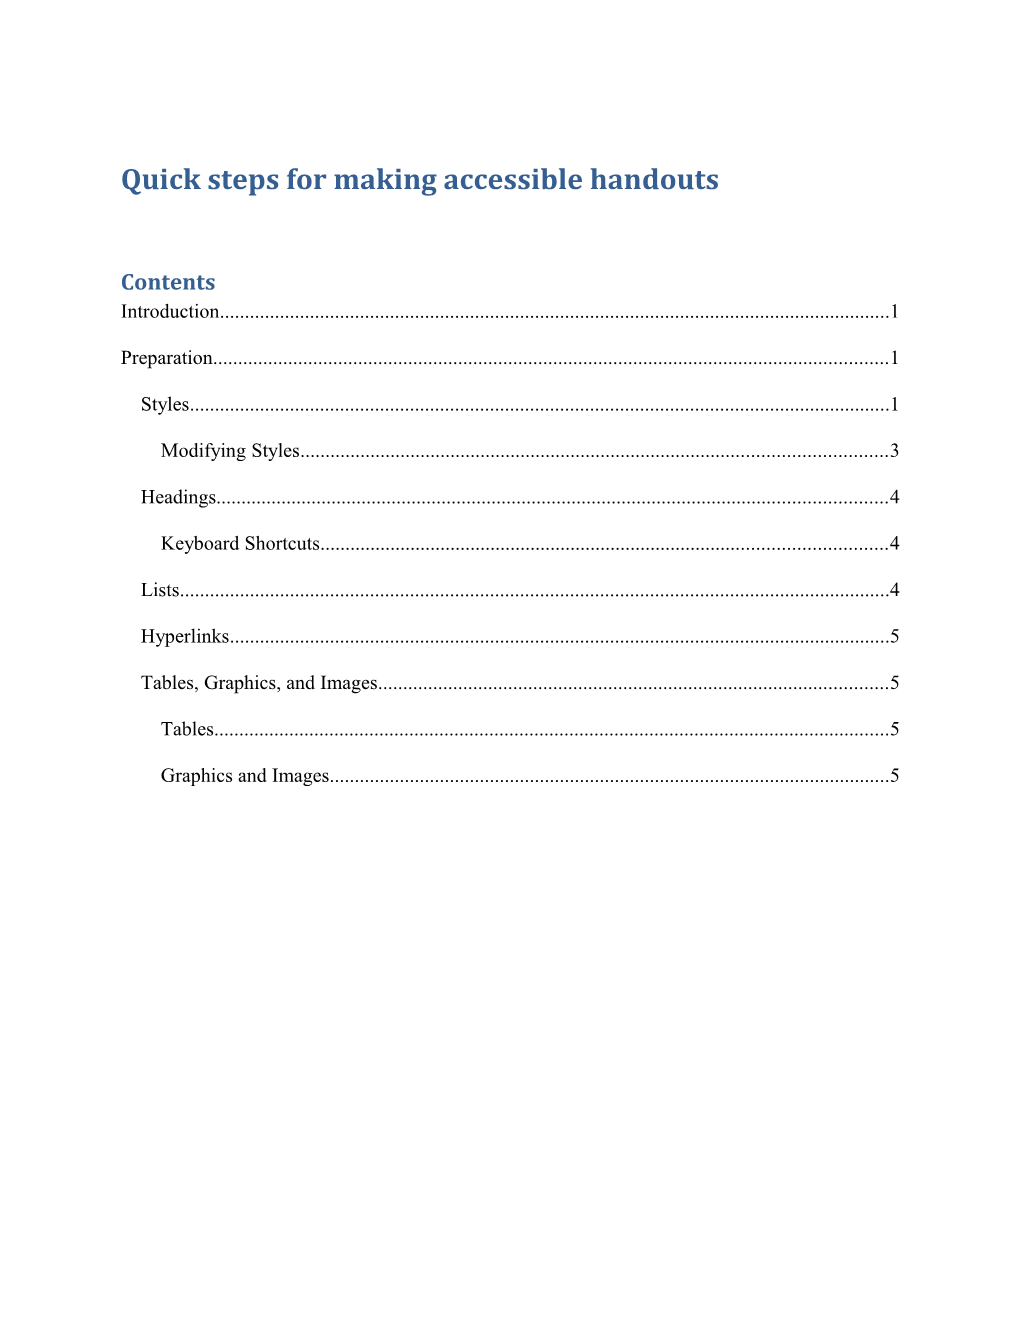 Quick Steps for Making Accessible Handouts